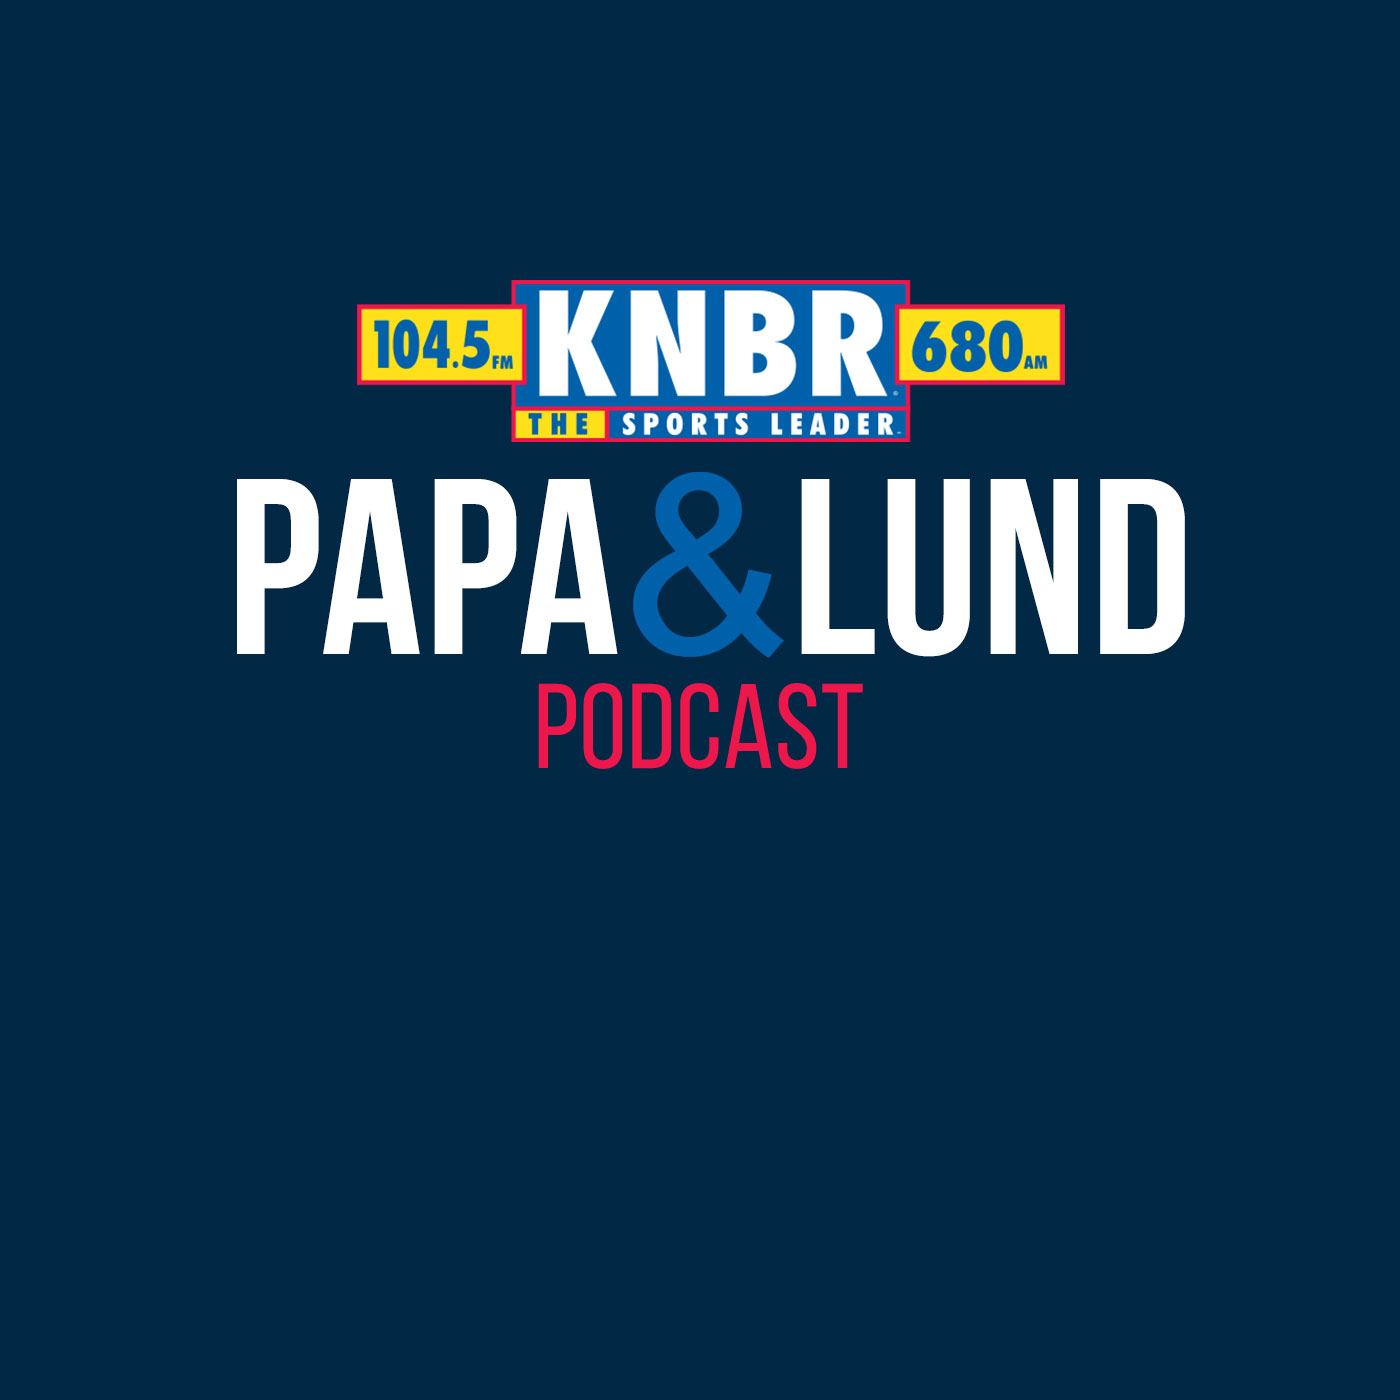 6-30 Andrew Baggarly joins Papa & Lund to project the direction of the Giants as we head into the second half of their season, plus how Michael Conforto's hot streak turned the season around & more